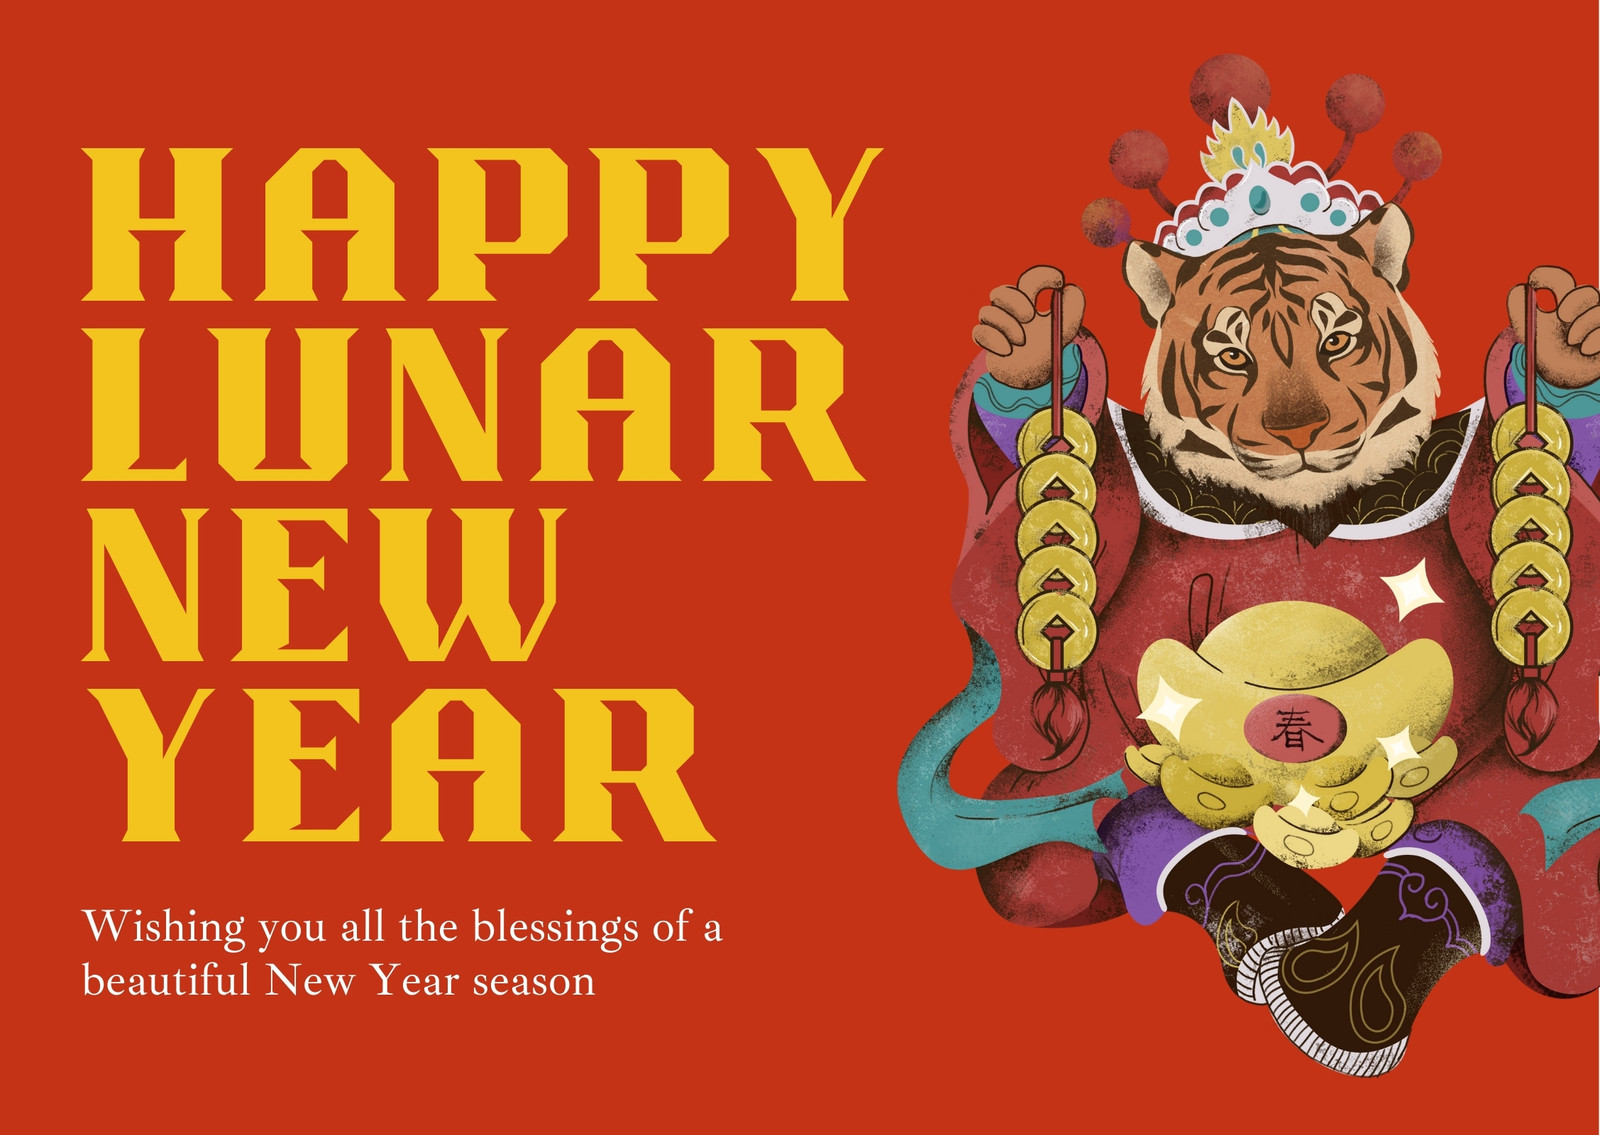 A Beautiful Chinese New Year Greetings. Free Happy Chinese New